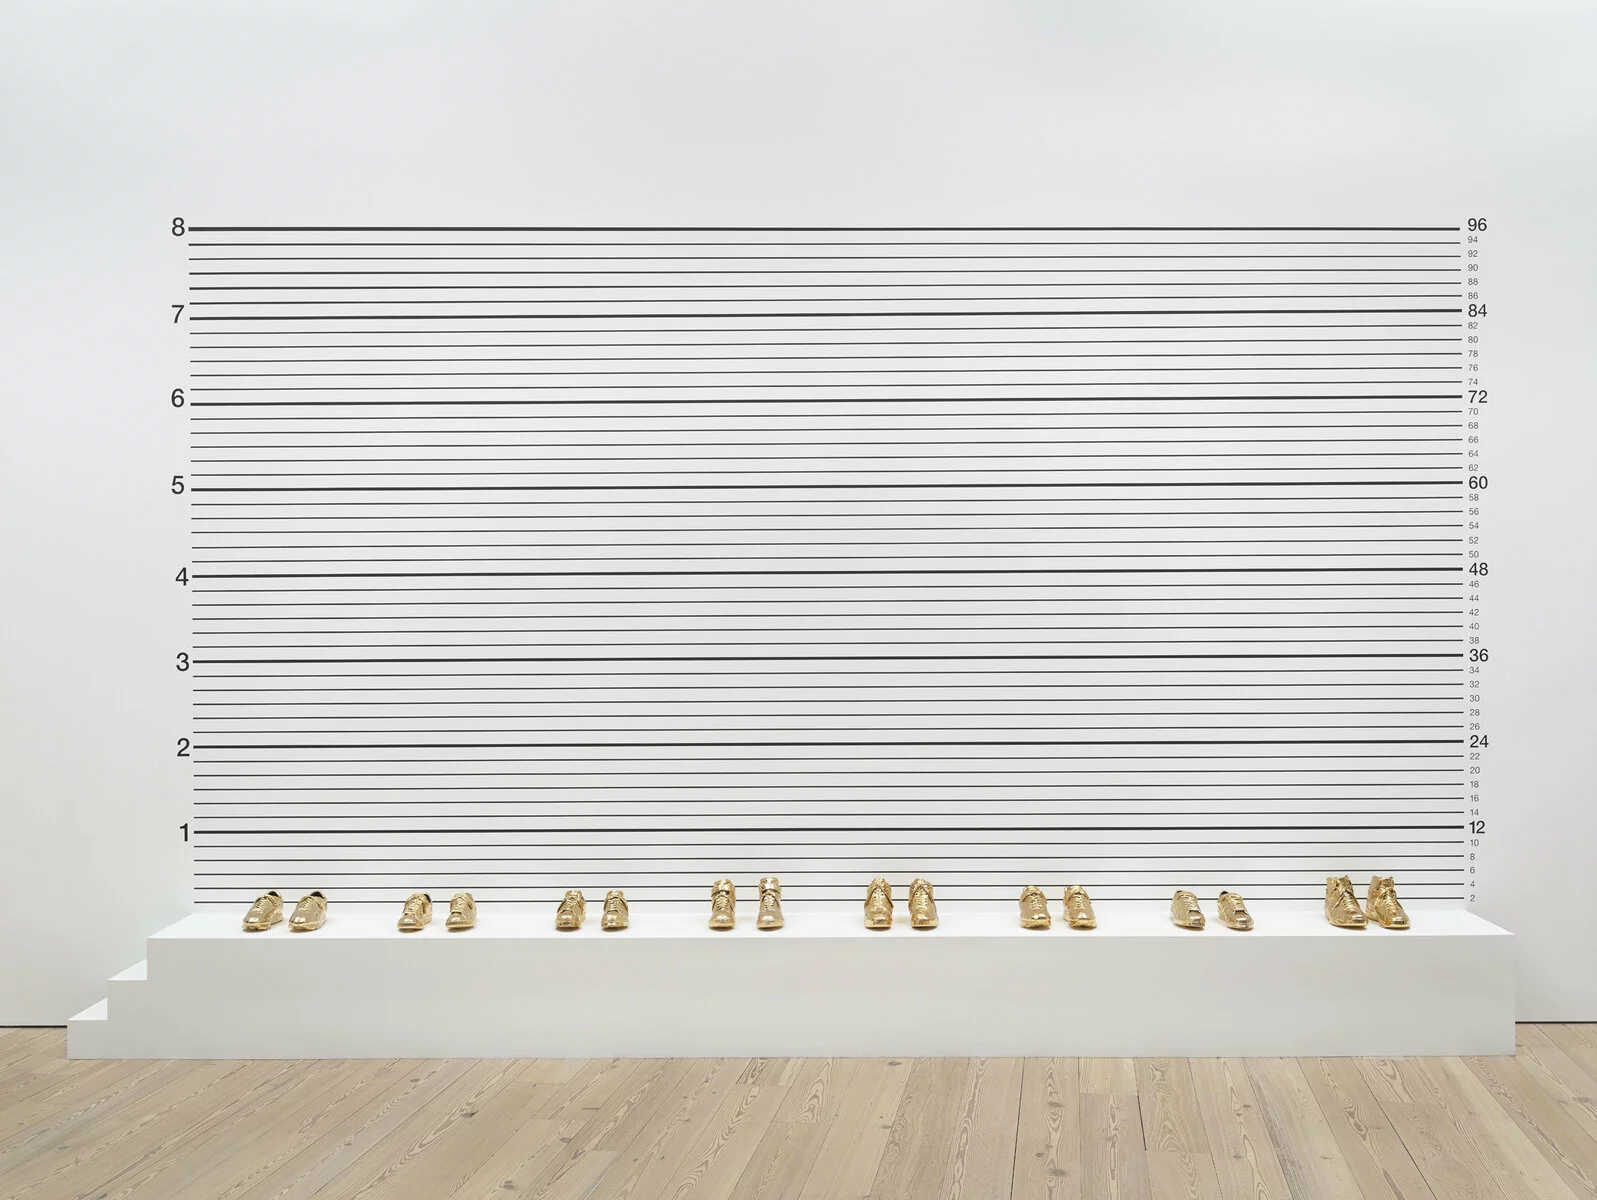 Photo of 8 pairs of gold-plated basketball shoes evenly spaced out on a white platform in front of a white wall with black numbers and lines.